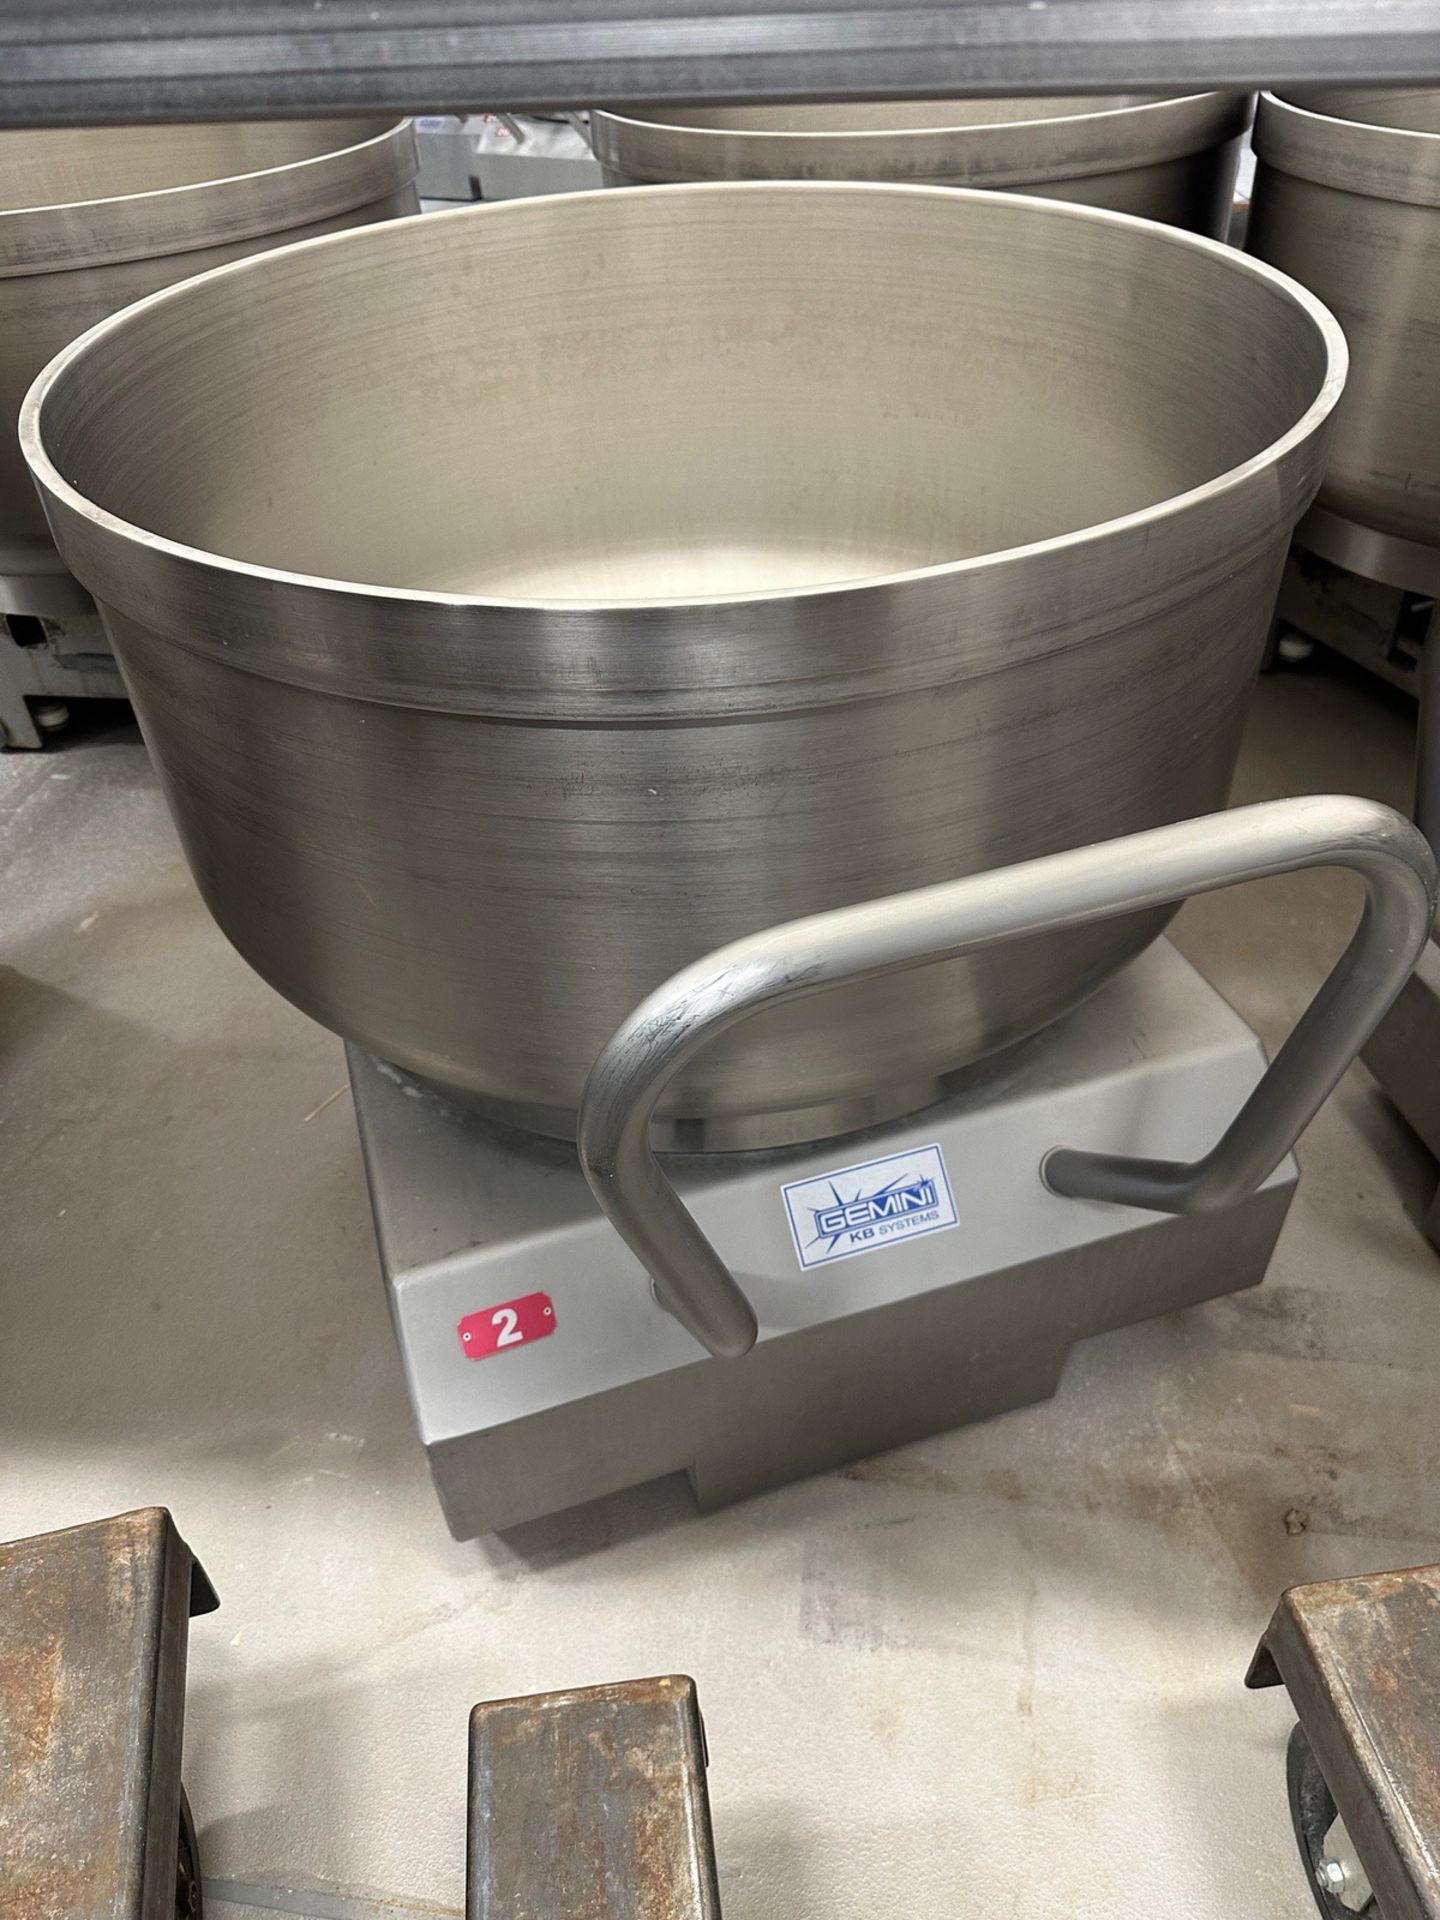 Lot of (2) Gemini 550 LB Capacity Stainless Steel Movable Bowls | Rig Fee $150 - Image 2 of 2